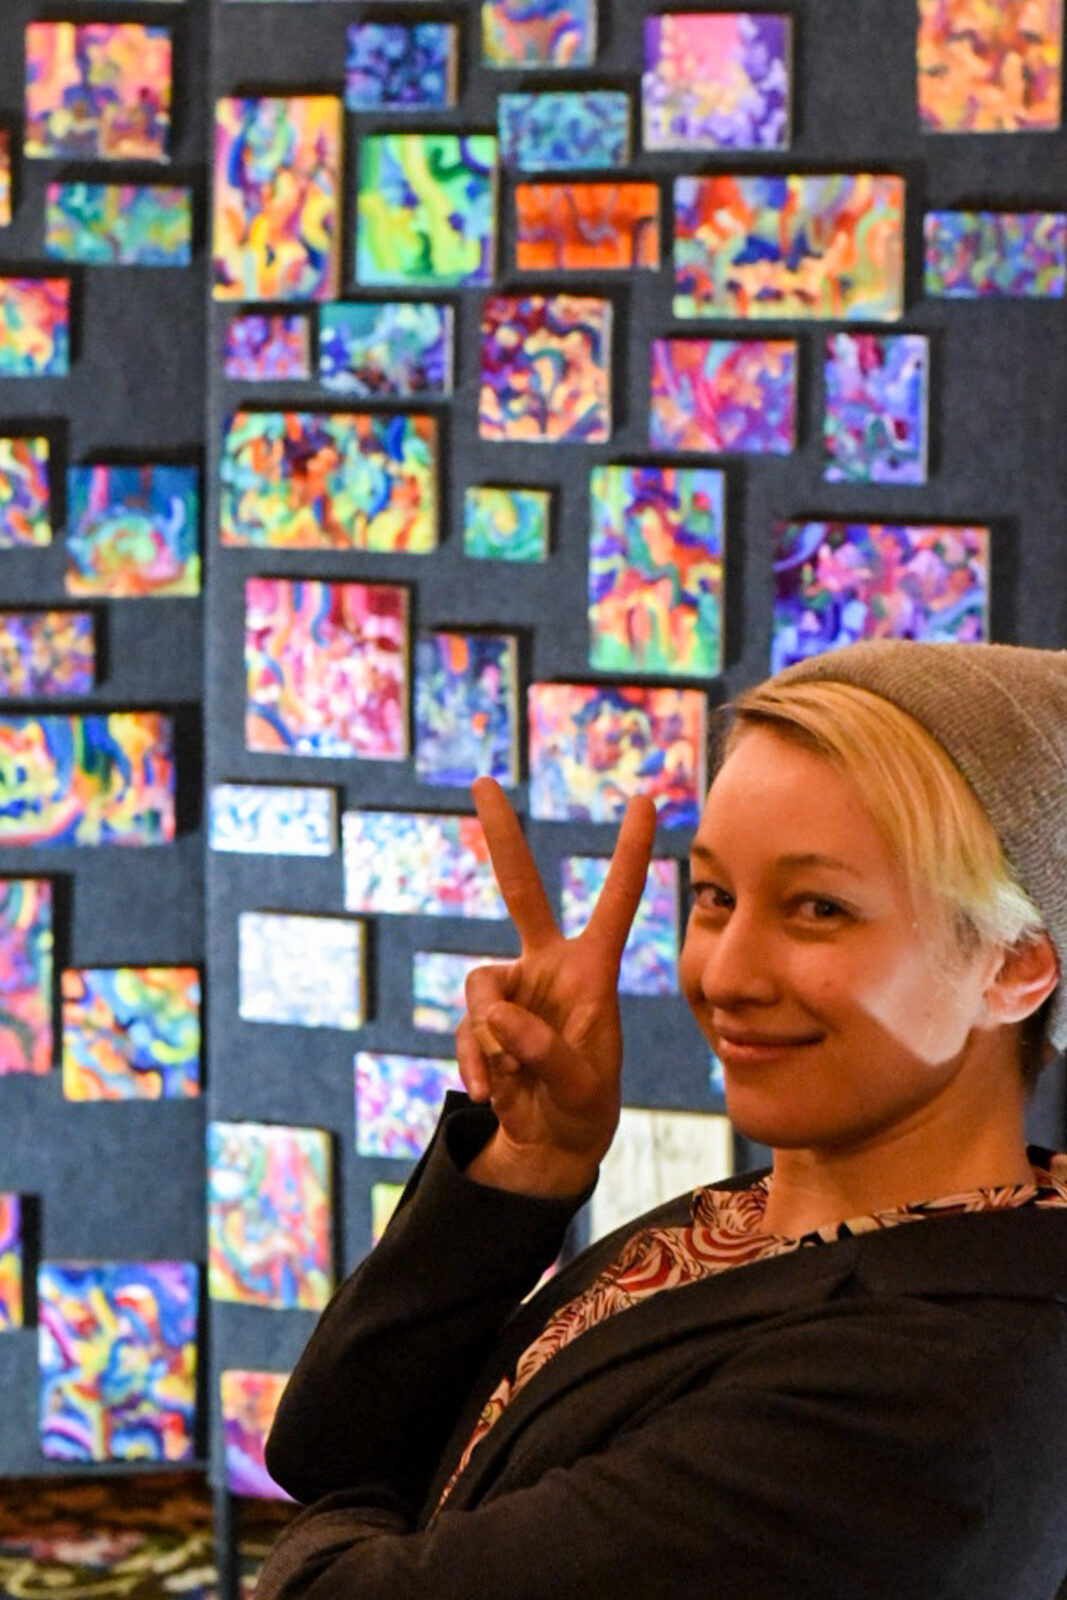 Person posing holding up a peace sign standing in front of a display of artwork